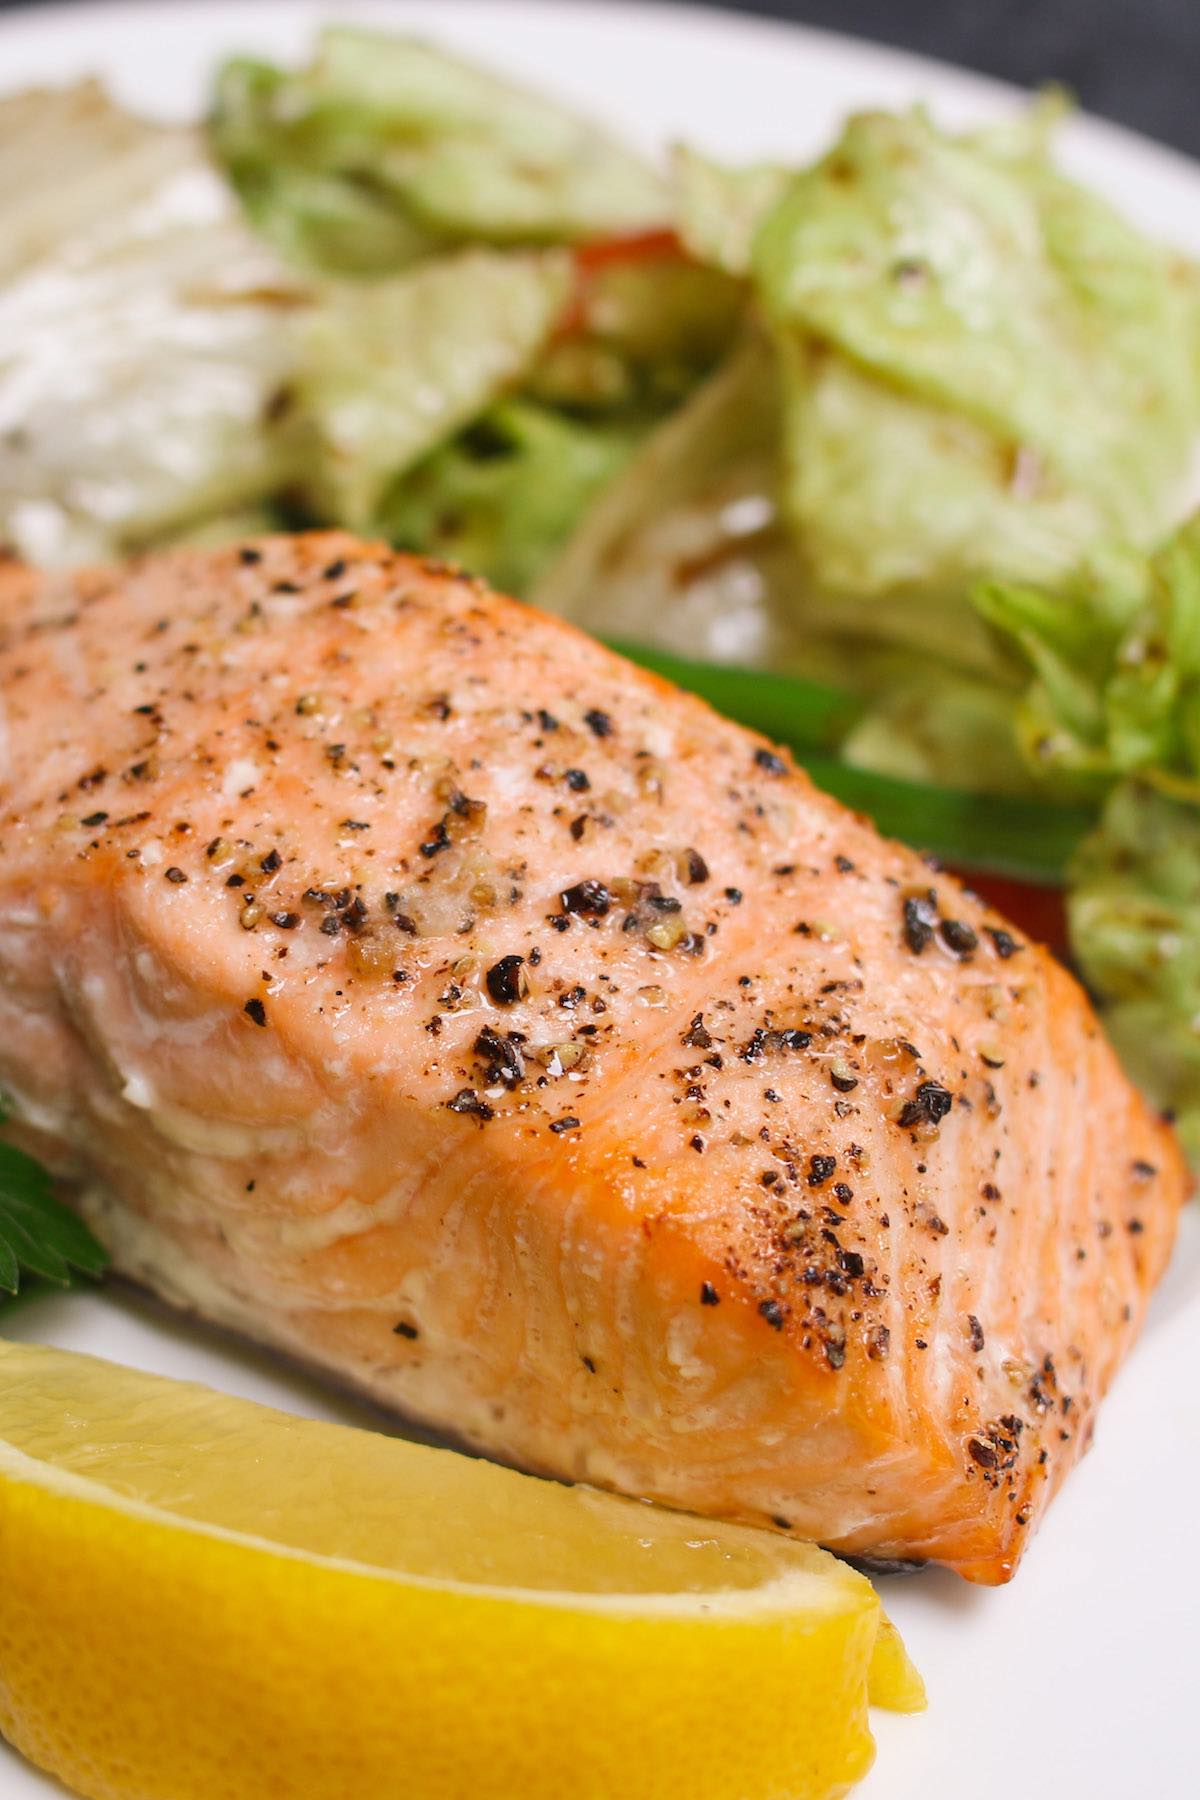 Serve portion grilled salmon fillet with a side salad on a serving plate with lemon